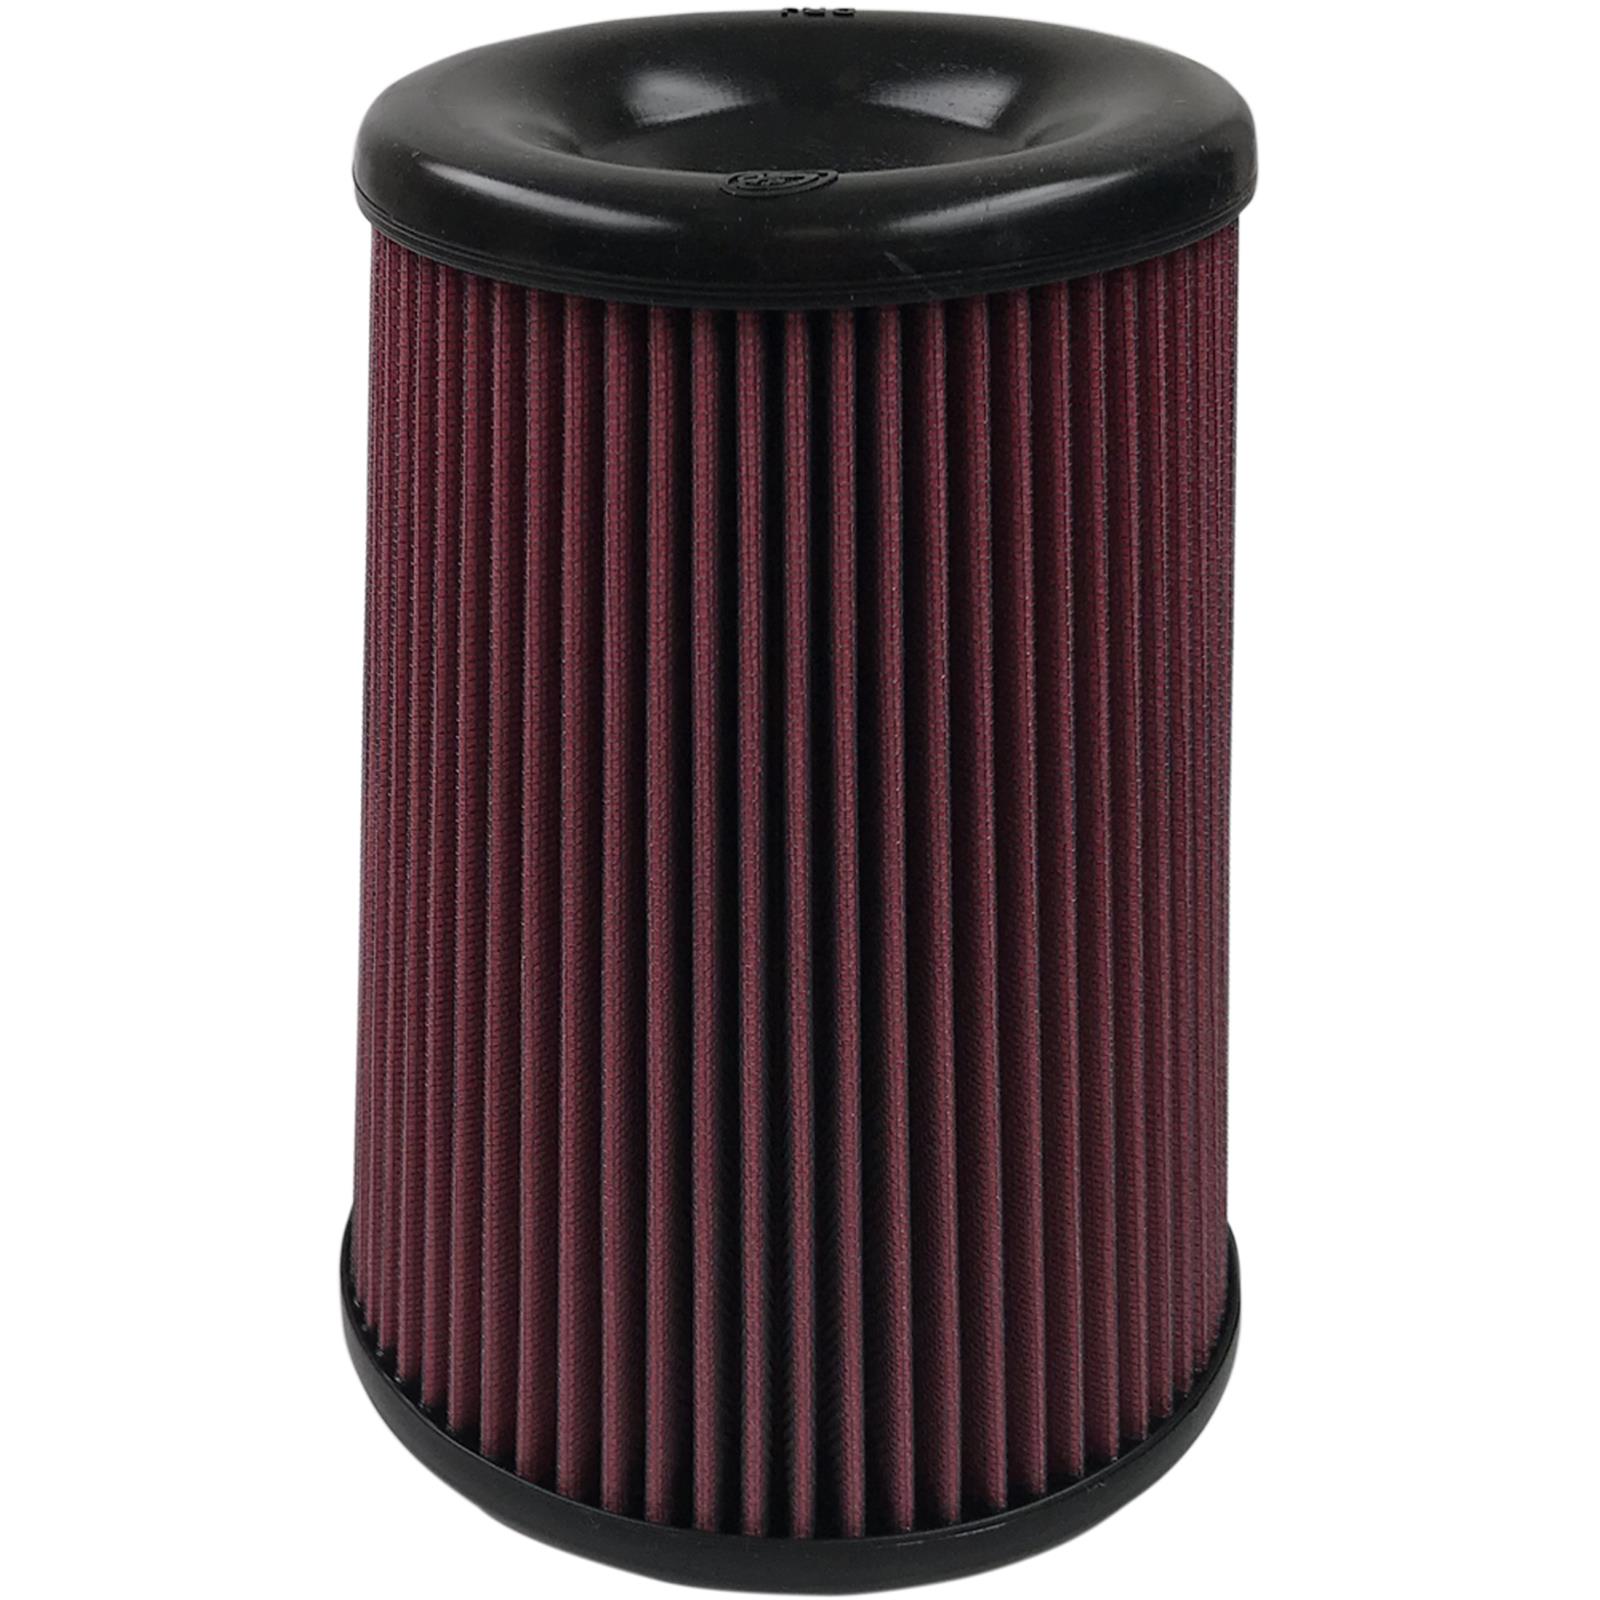 S&B Filters KF-1063 S&B Filters Cleanable Cotton Replacement 